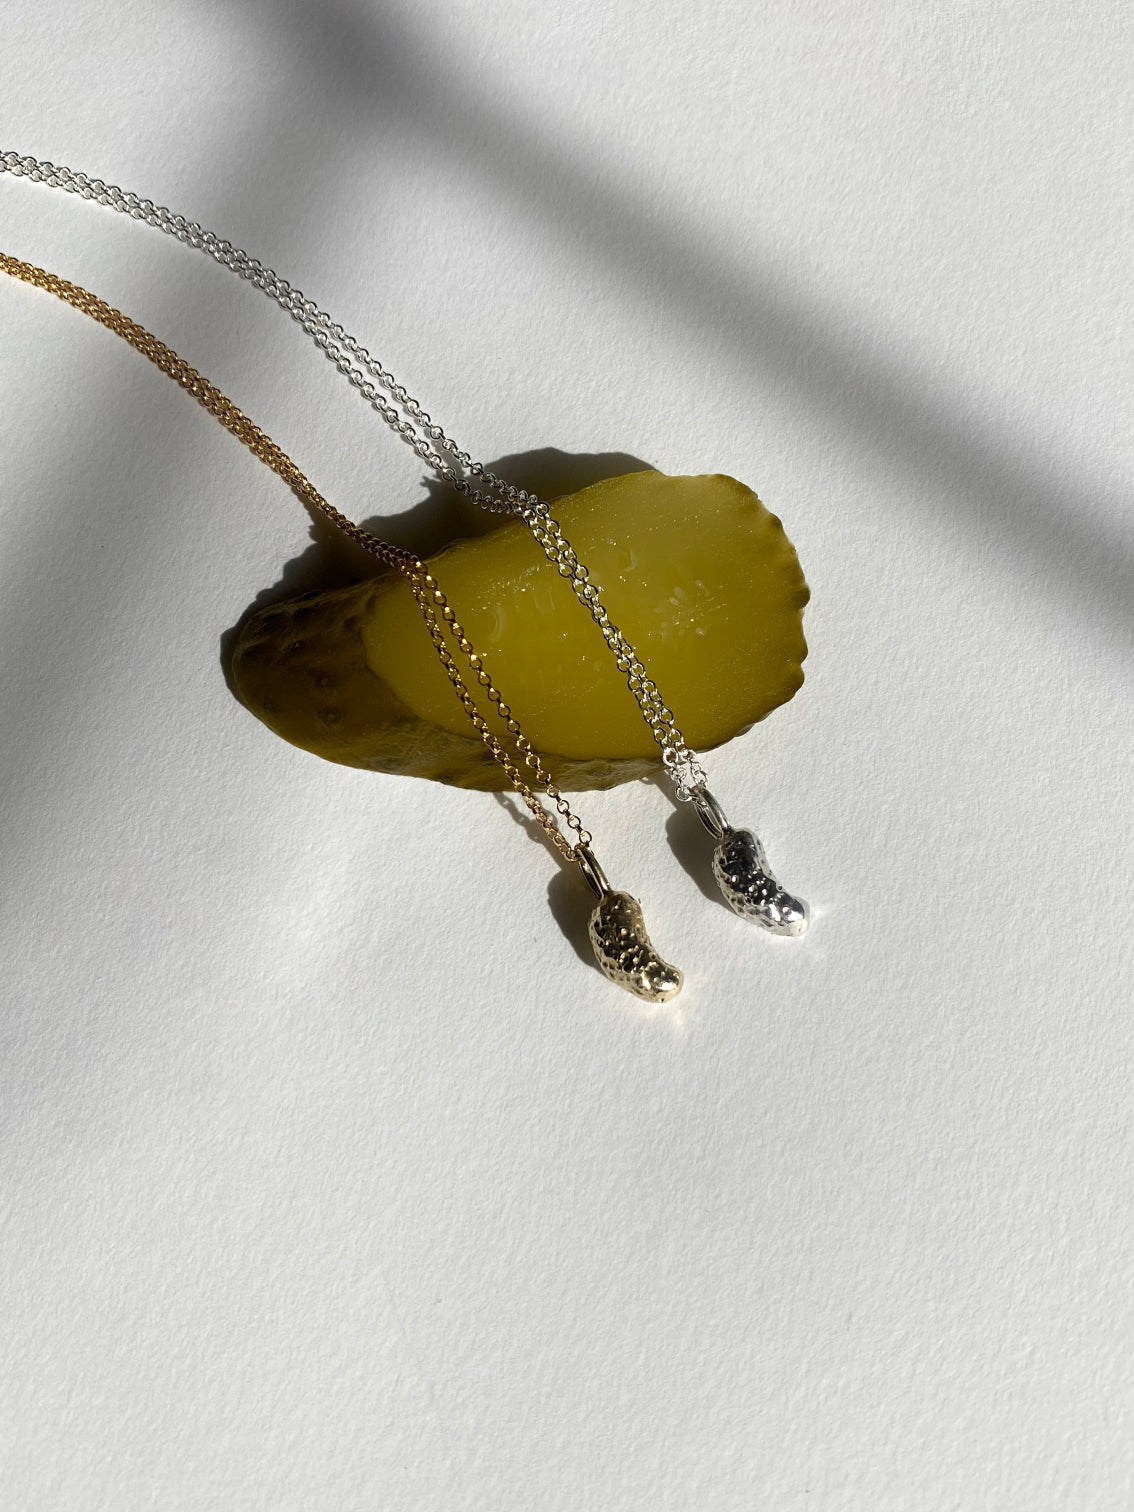 Silver and gold pickle charm necklaces resting on pickle slice on white background